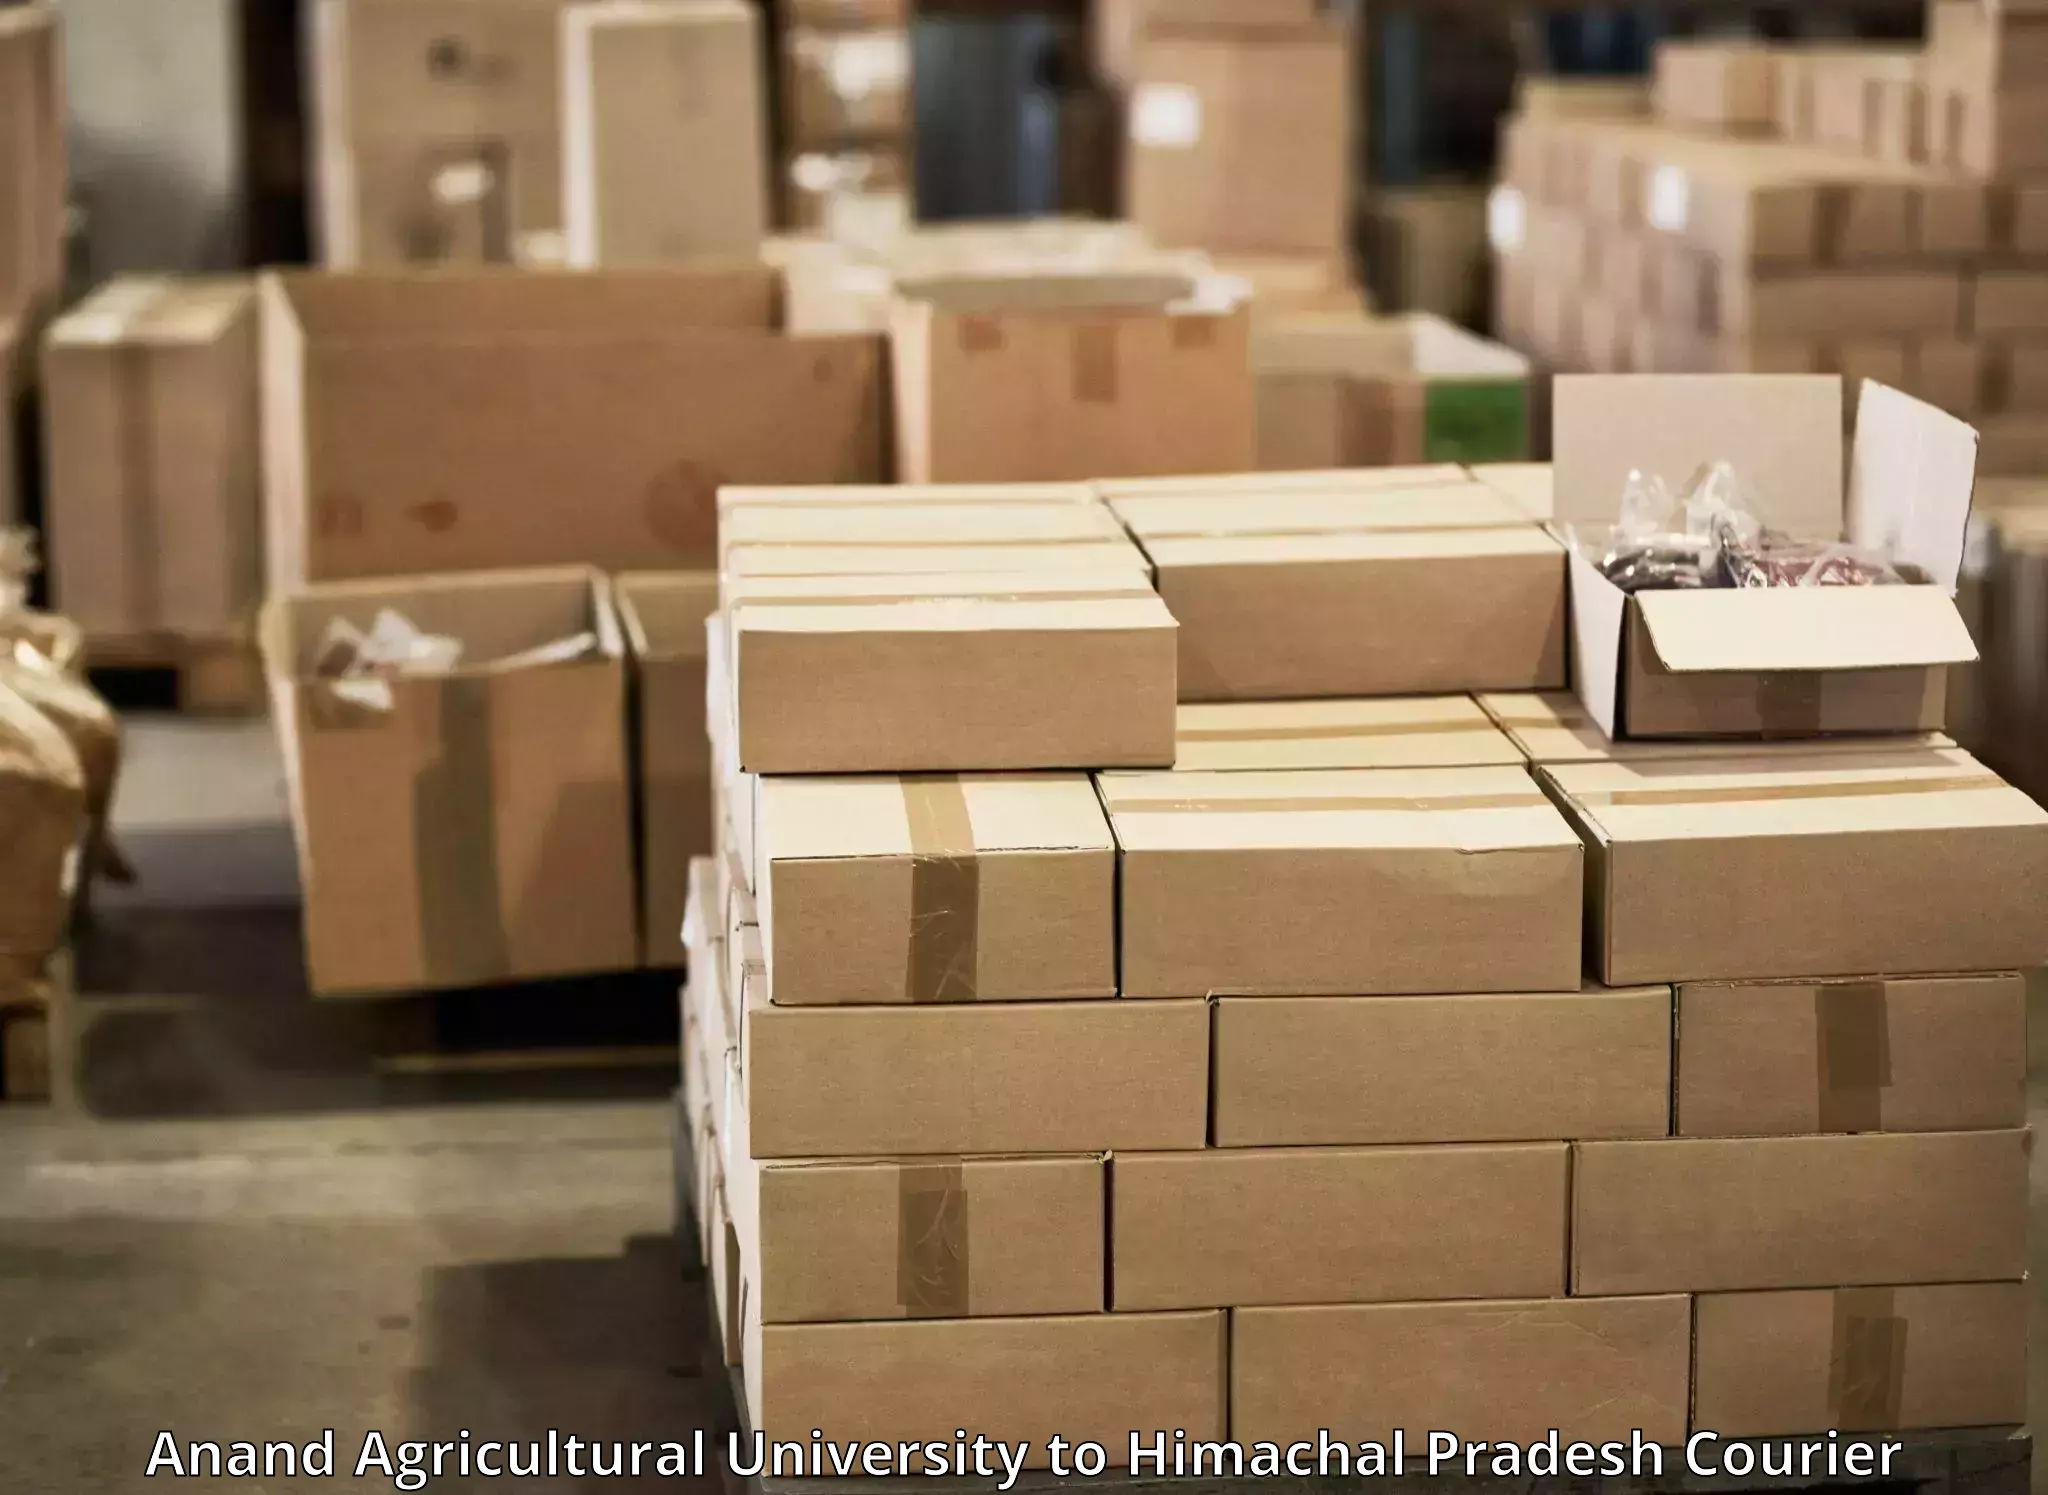 Express logistics providers Anand Agricultural University to Naina Devi